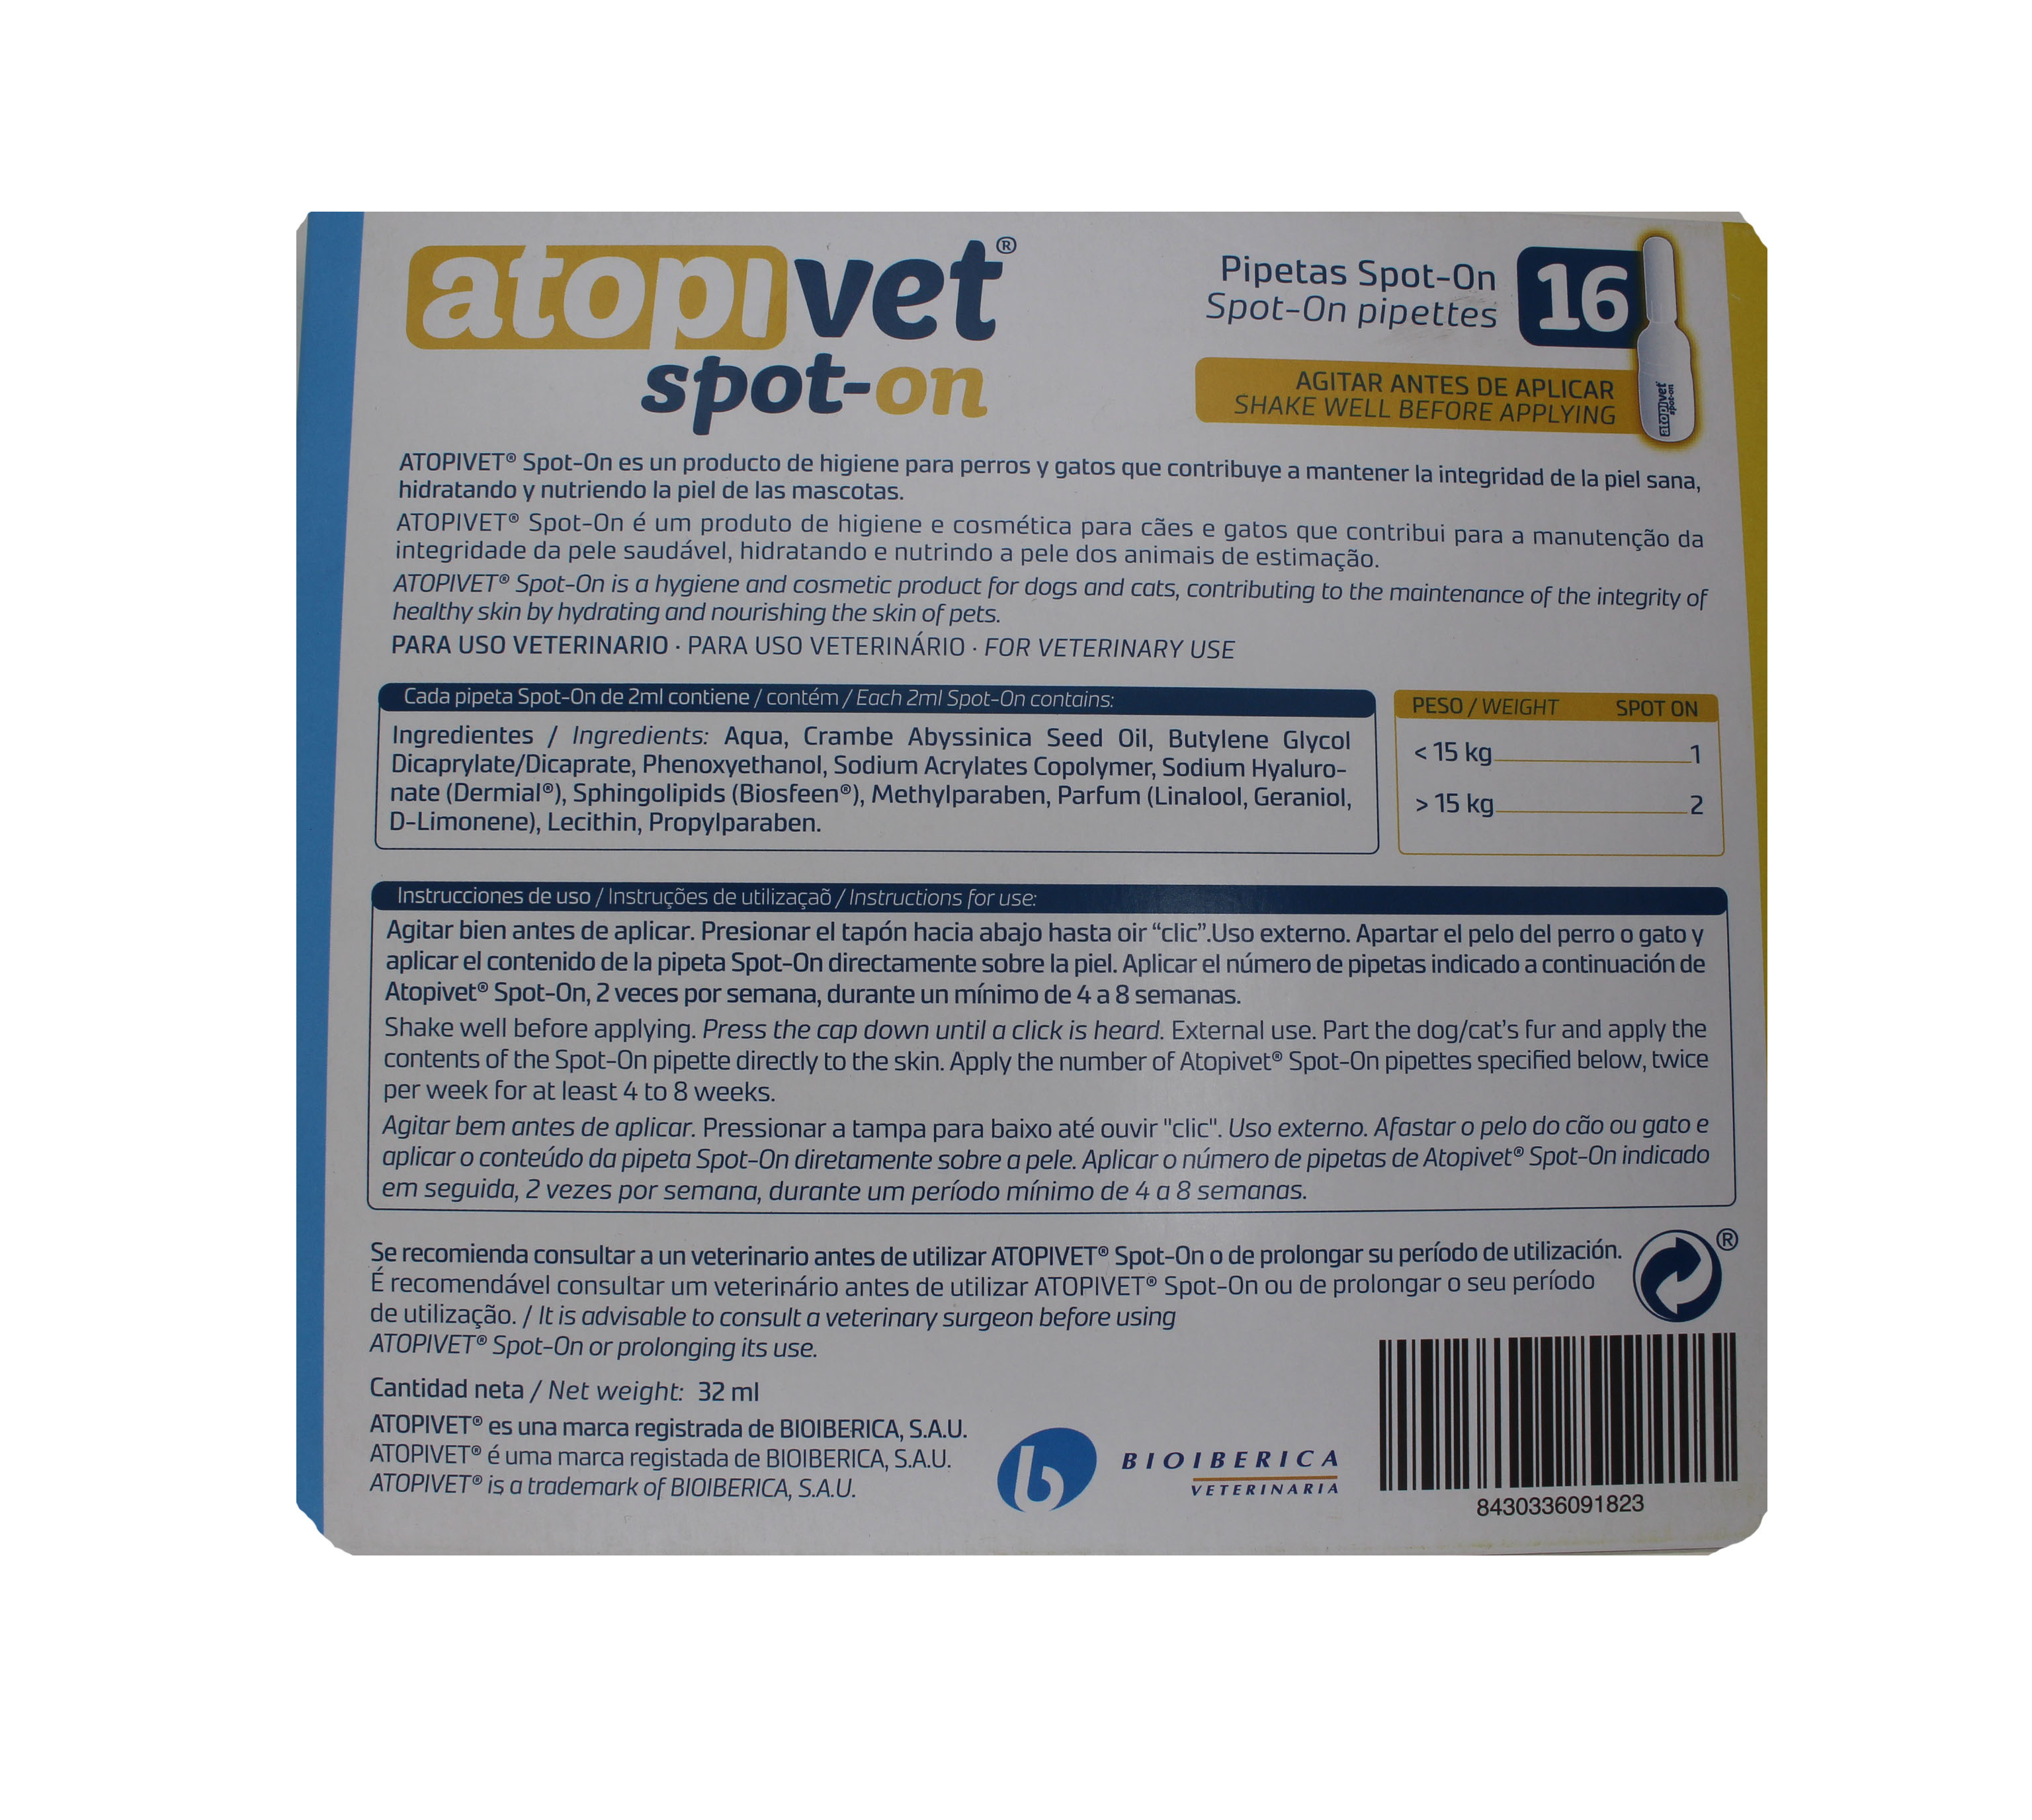 Atopivet 180 FOR DOGS-AQUA+CRAMBE ABYSSINICA SEED OI